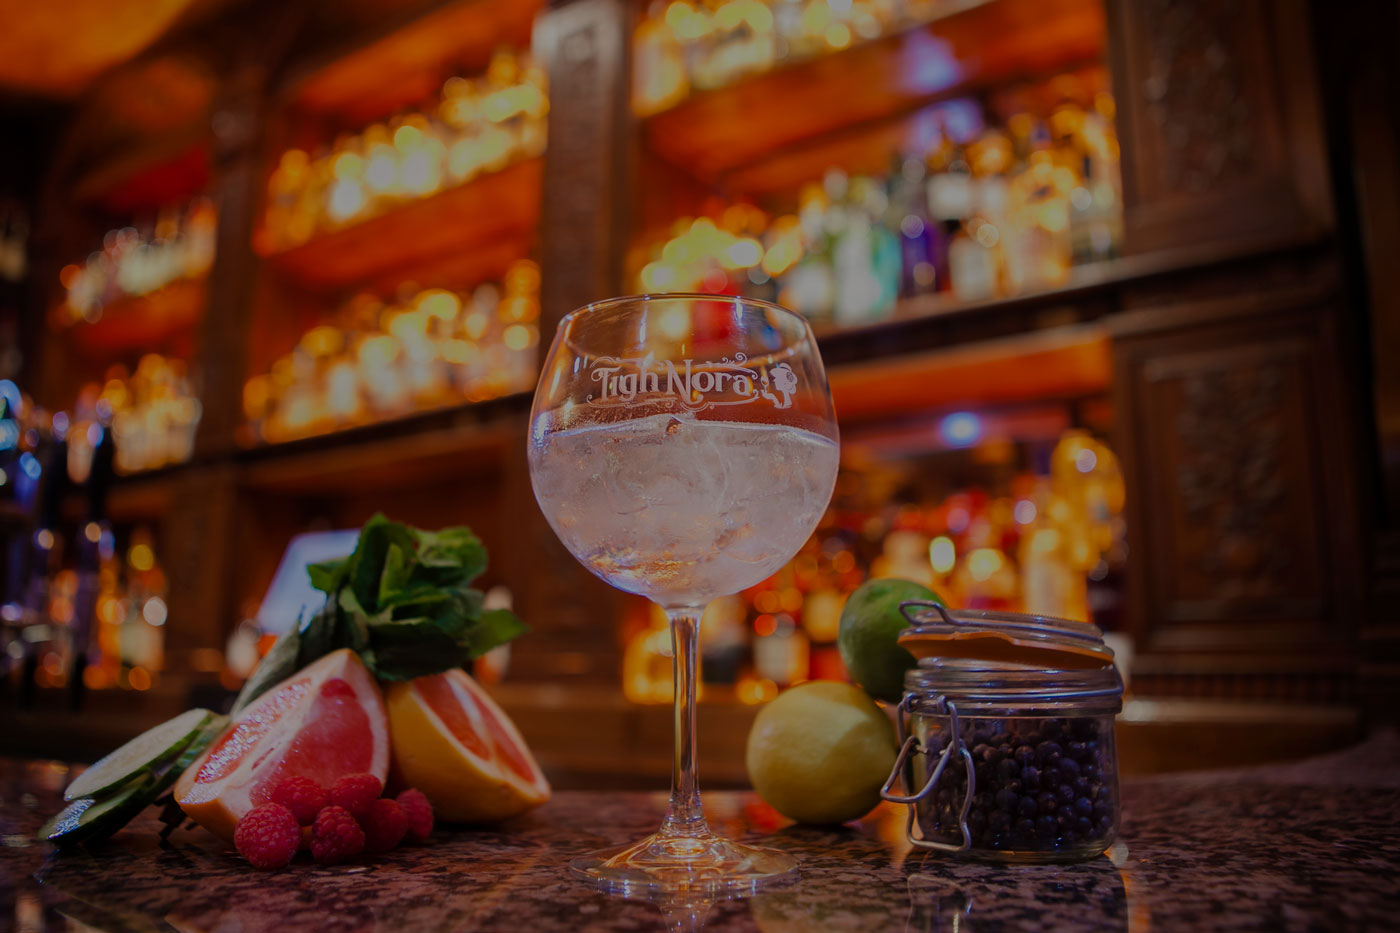 Welcome to Tigh Nora, Galway's New Gin Bar opening Friday 10th March 2017! 